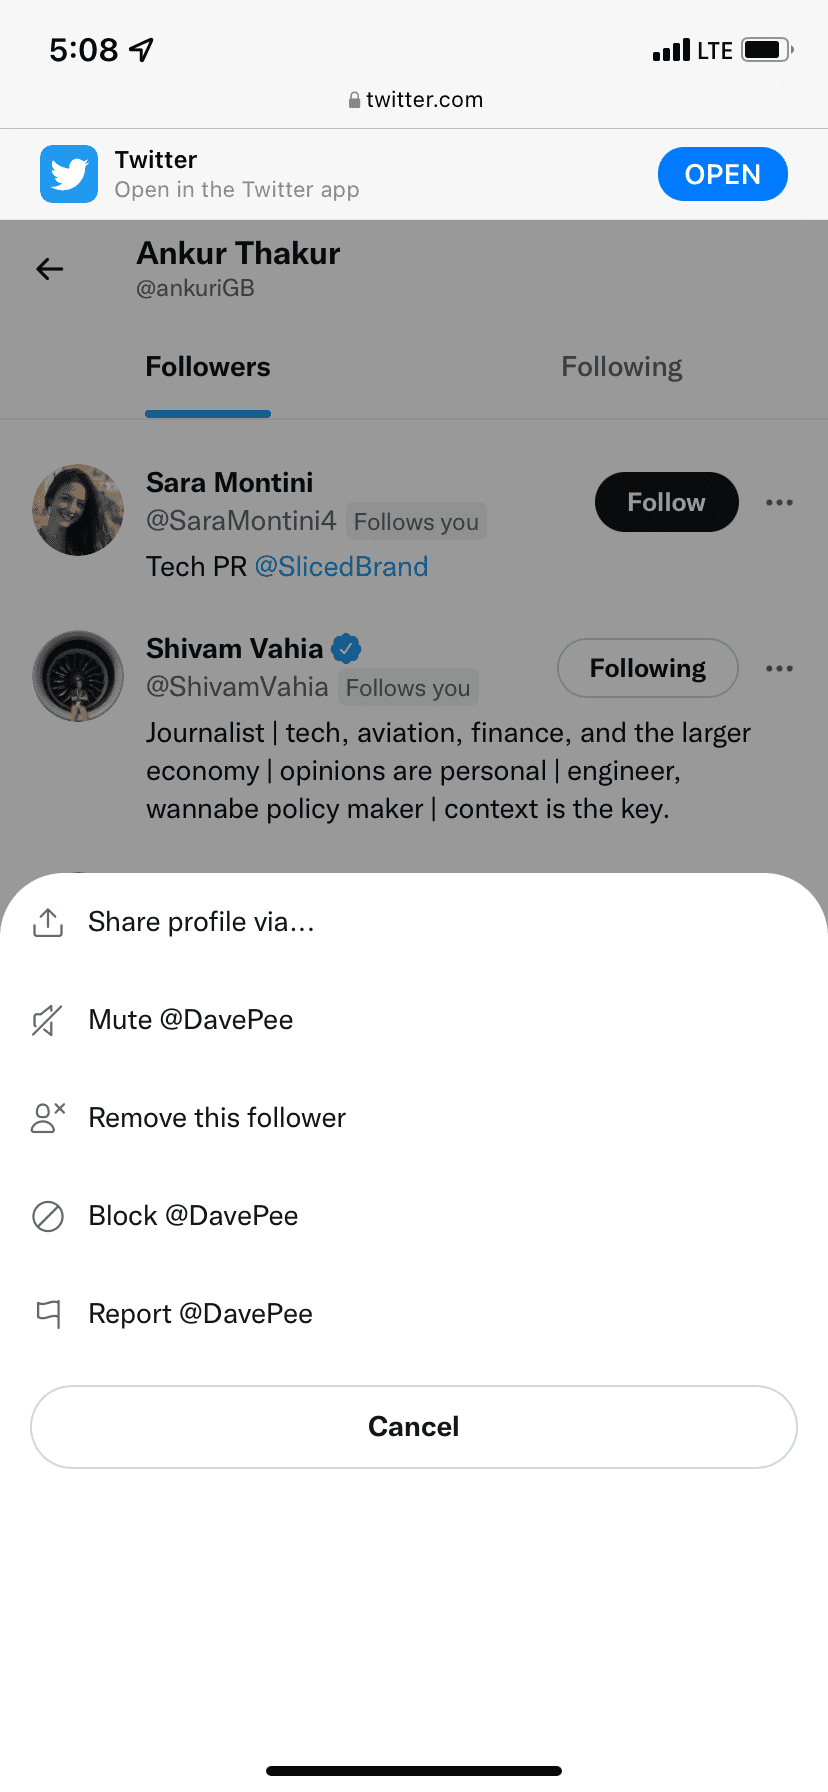 Twitter's Remove this follower option